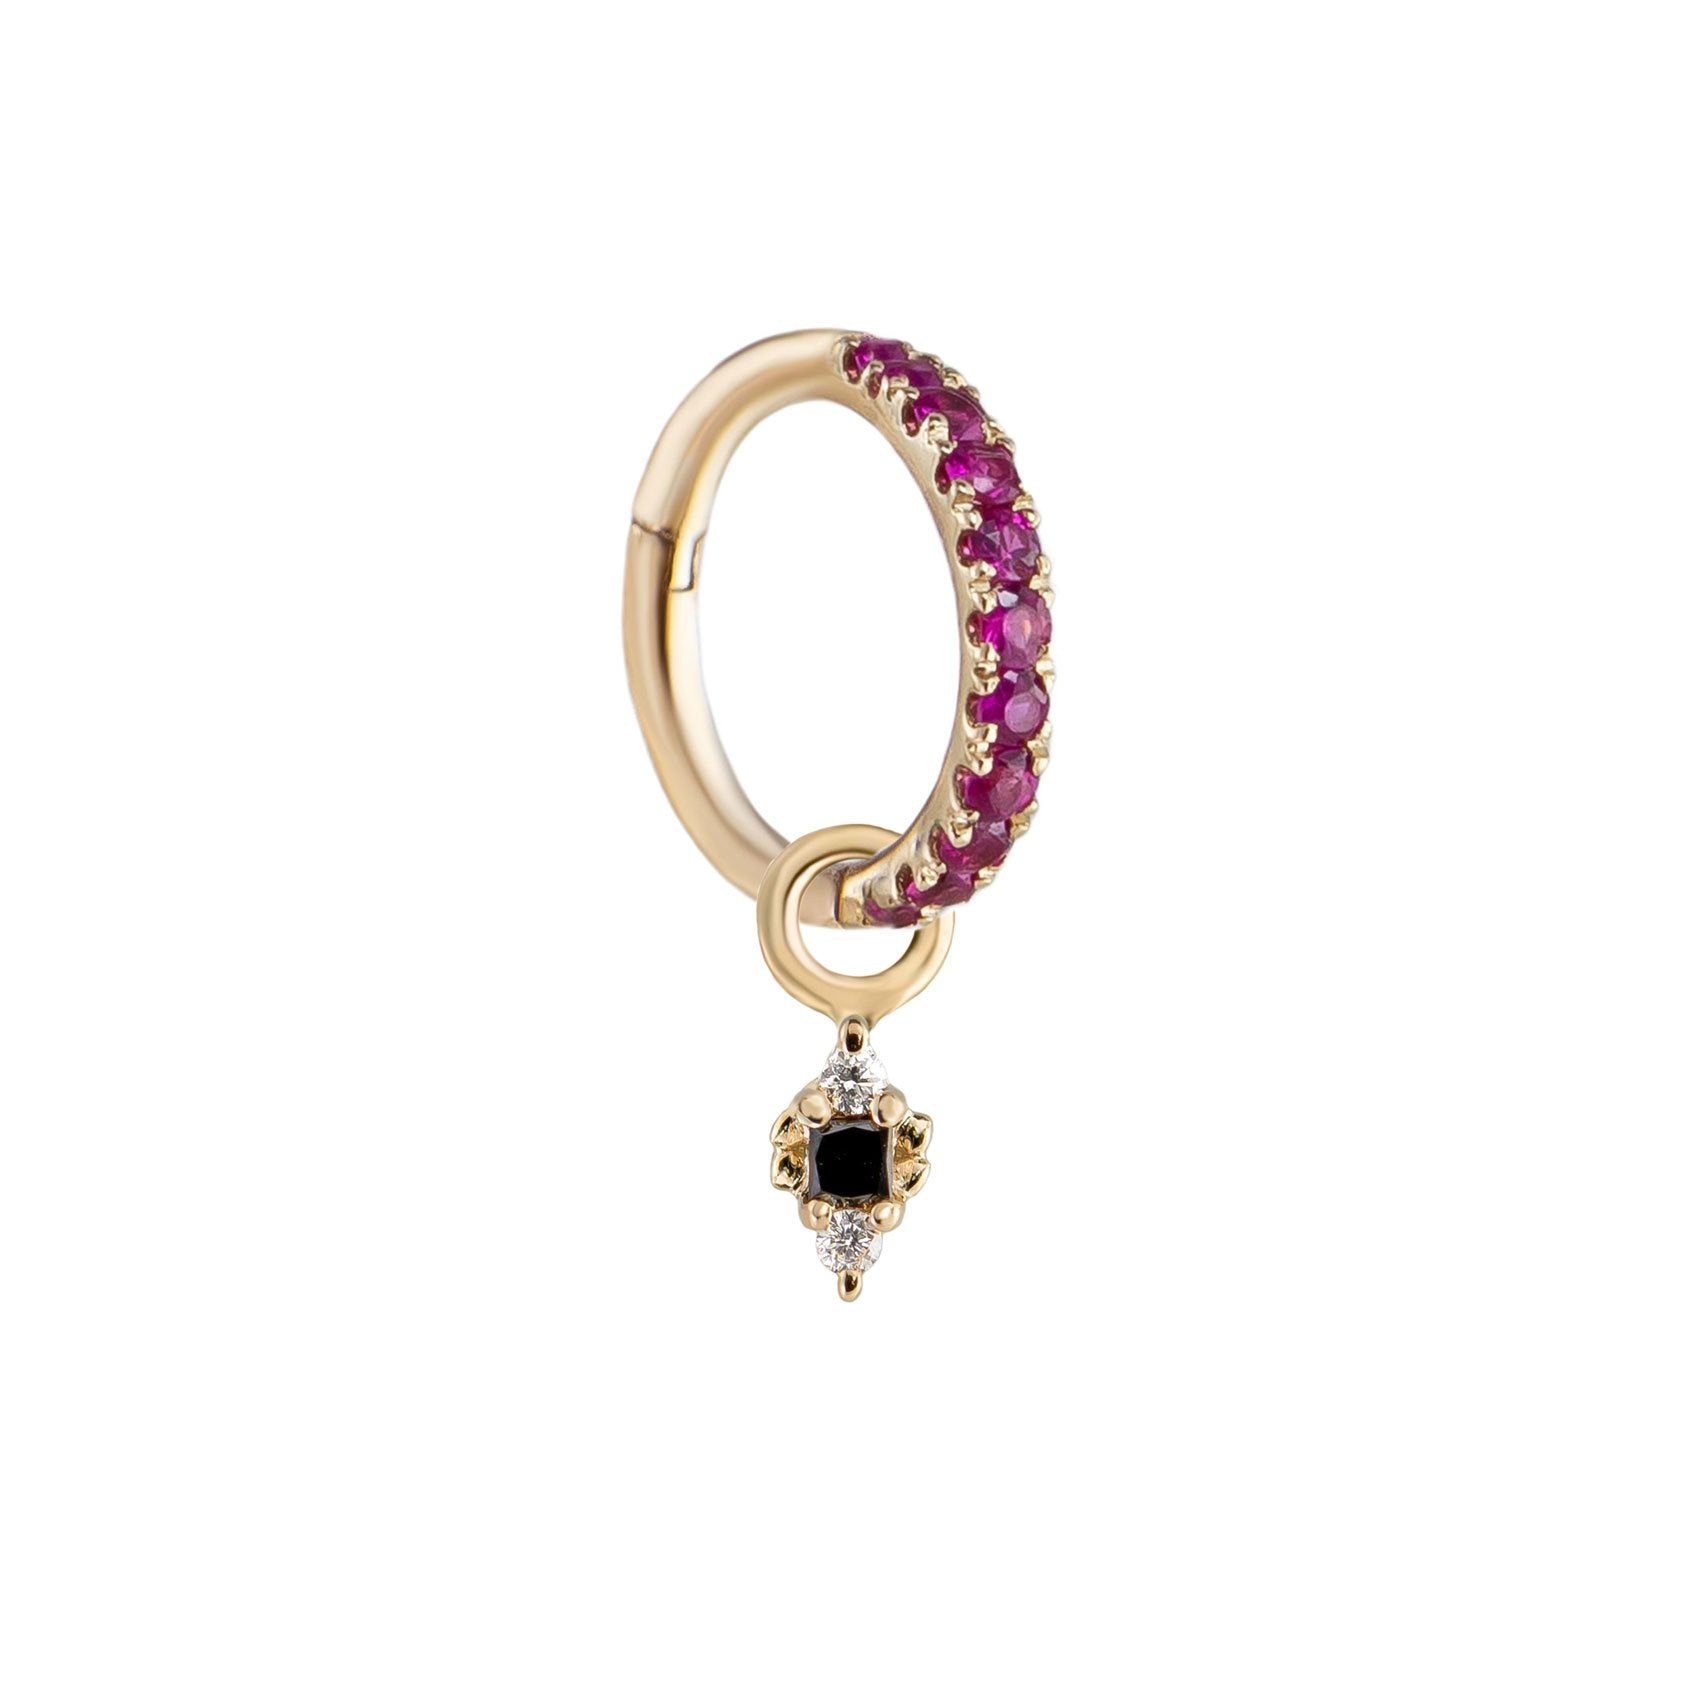 Métier by tomfoolery Ruby Hexa and Dala Ear Story. 9ct Yellow Gold. White and Black Diamonds. Rubies.